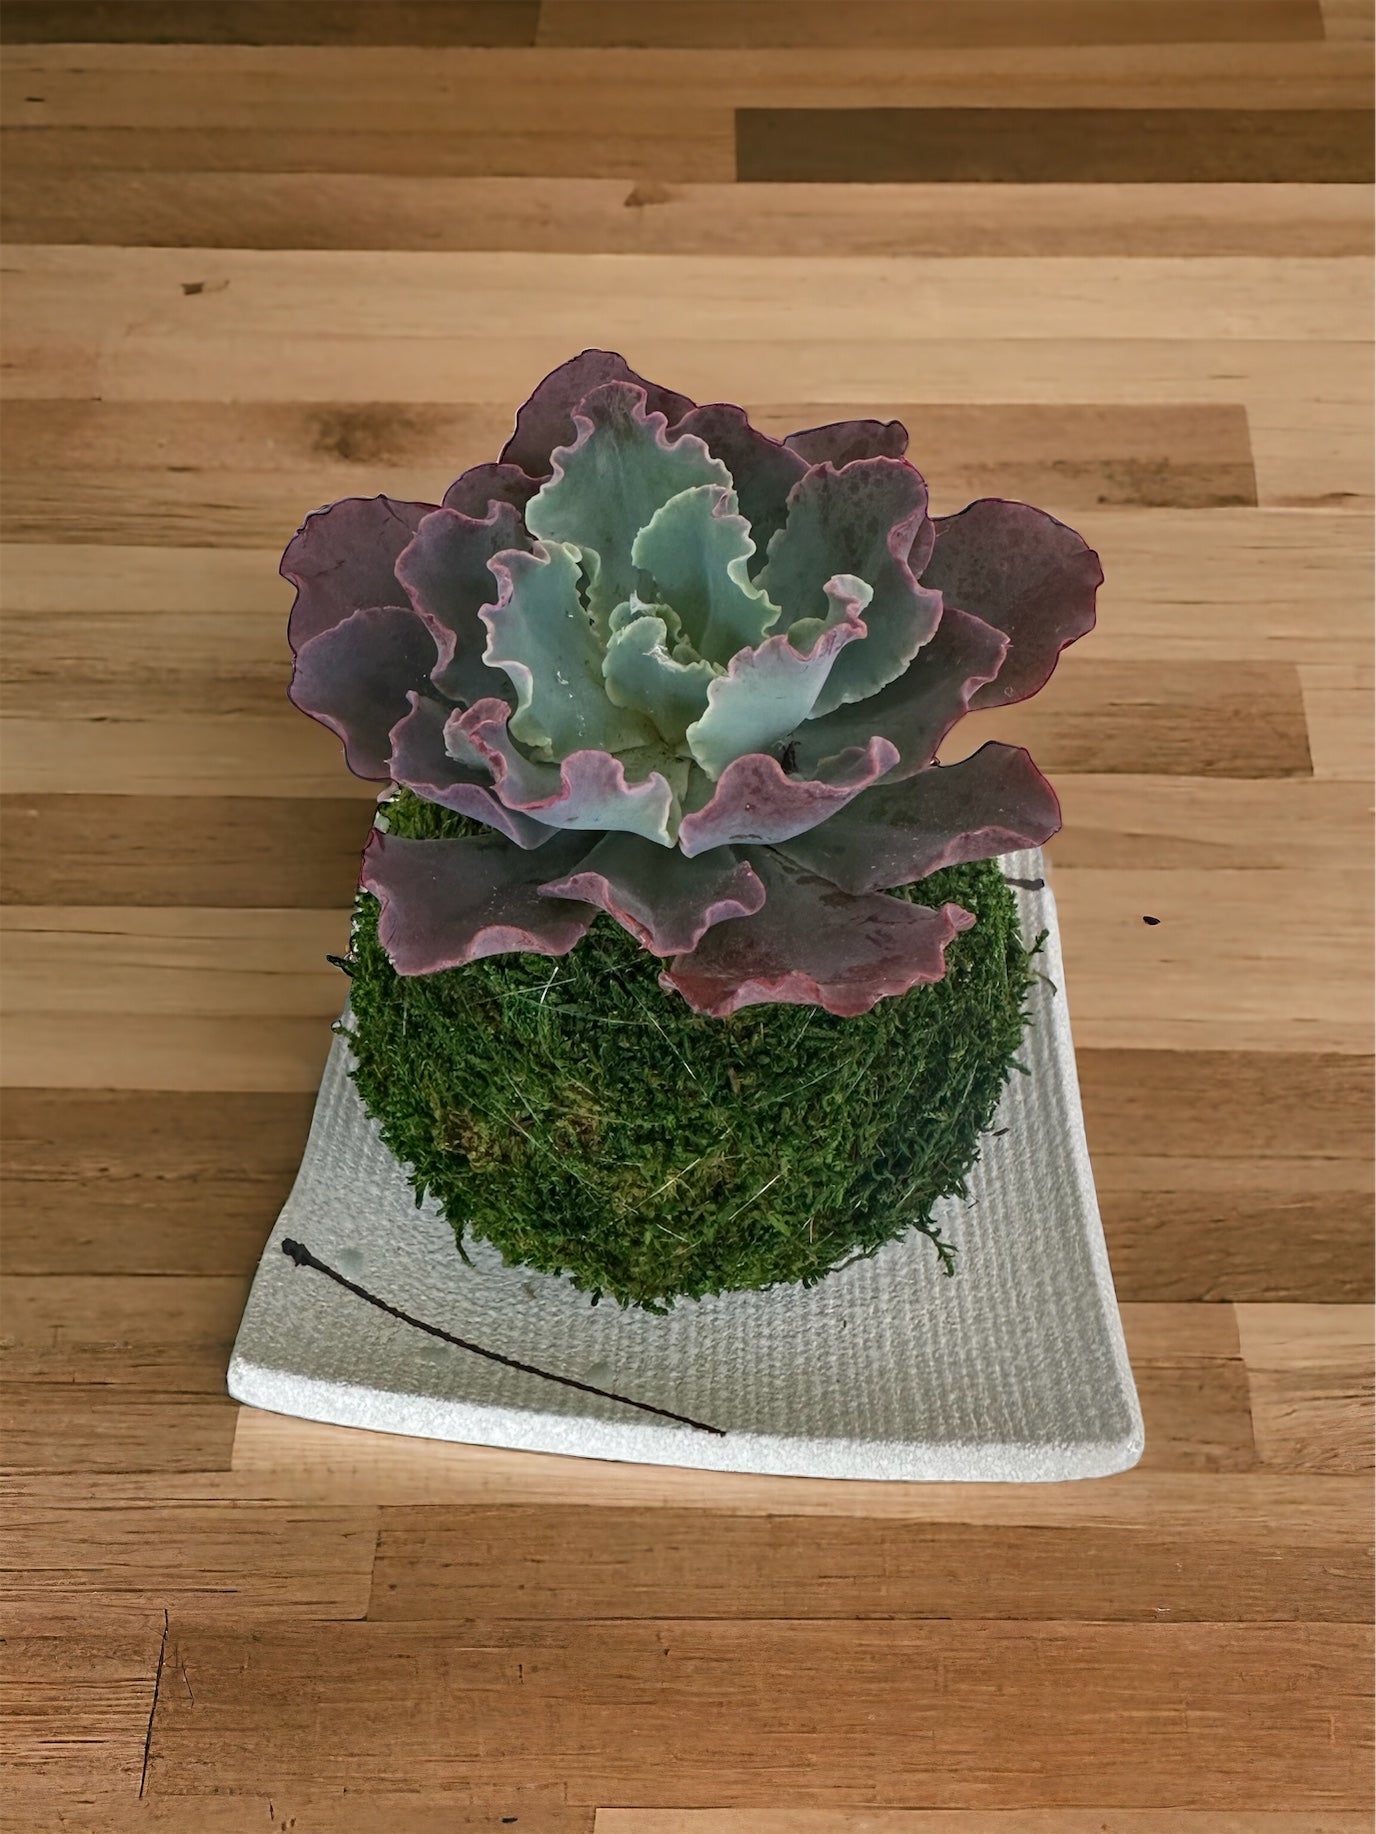 Square white saucer with flower branch design, good for small to medium kokedama 5" x 5" x 0.5"h